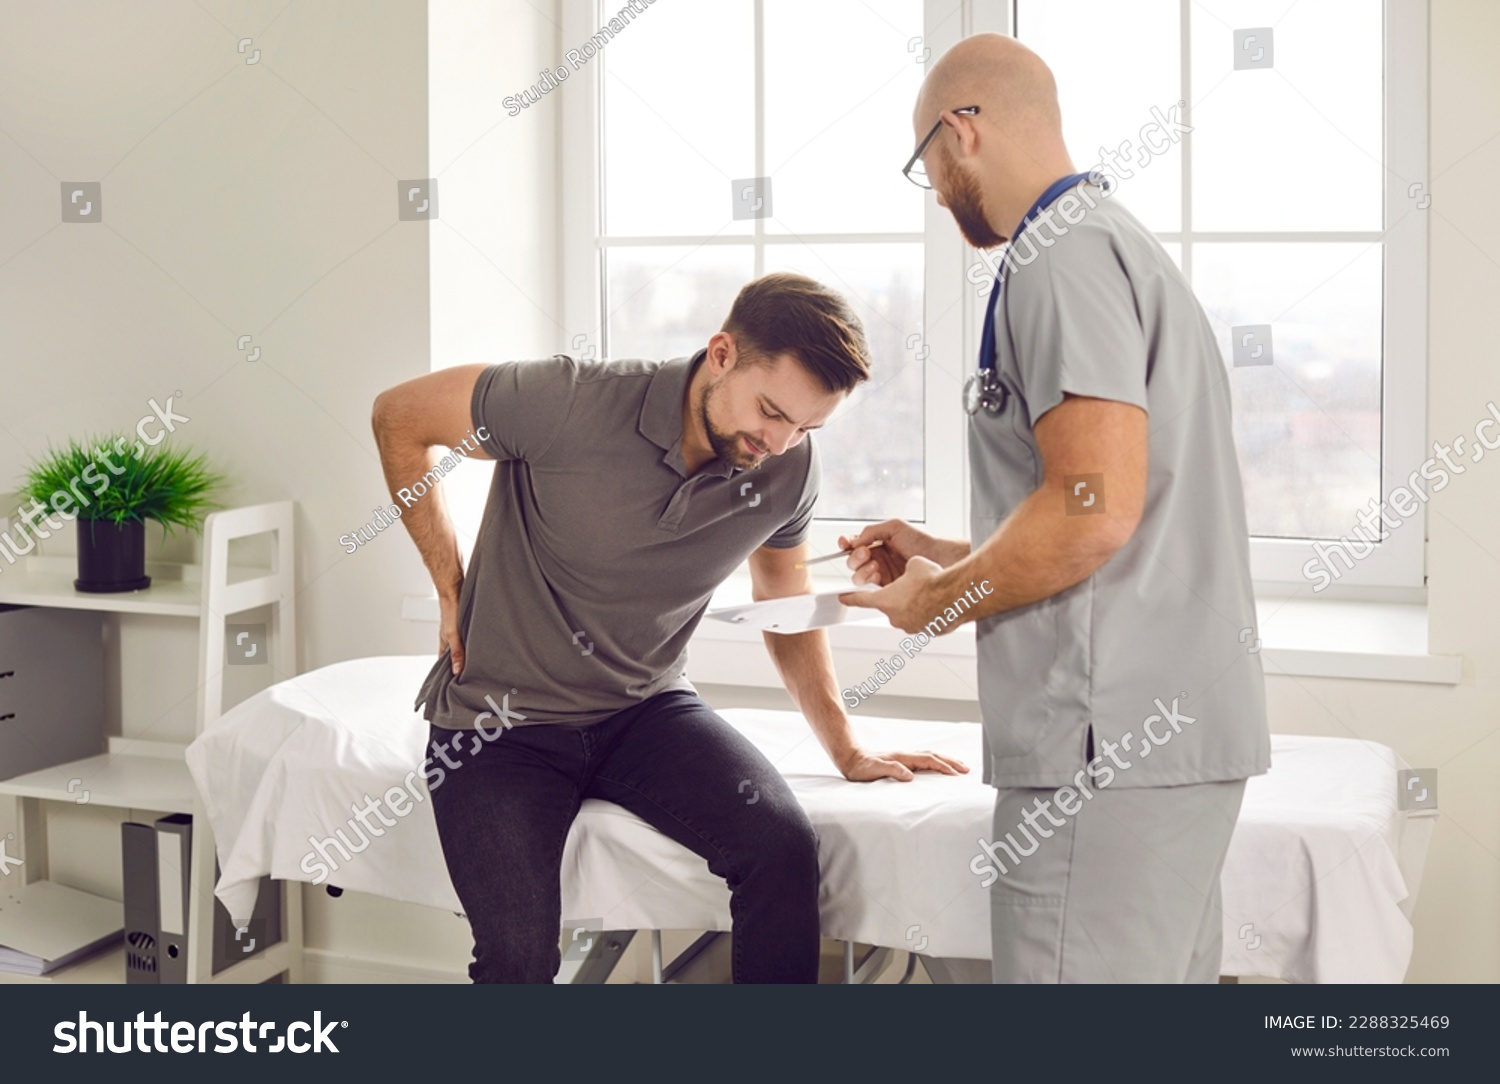 Patient with lower back pain comes to the doctor. Young man suffering from lumbar pain sitting on a medical bed at the clinic and asking a professional physician to help him #2288325469